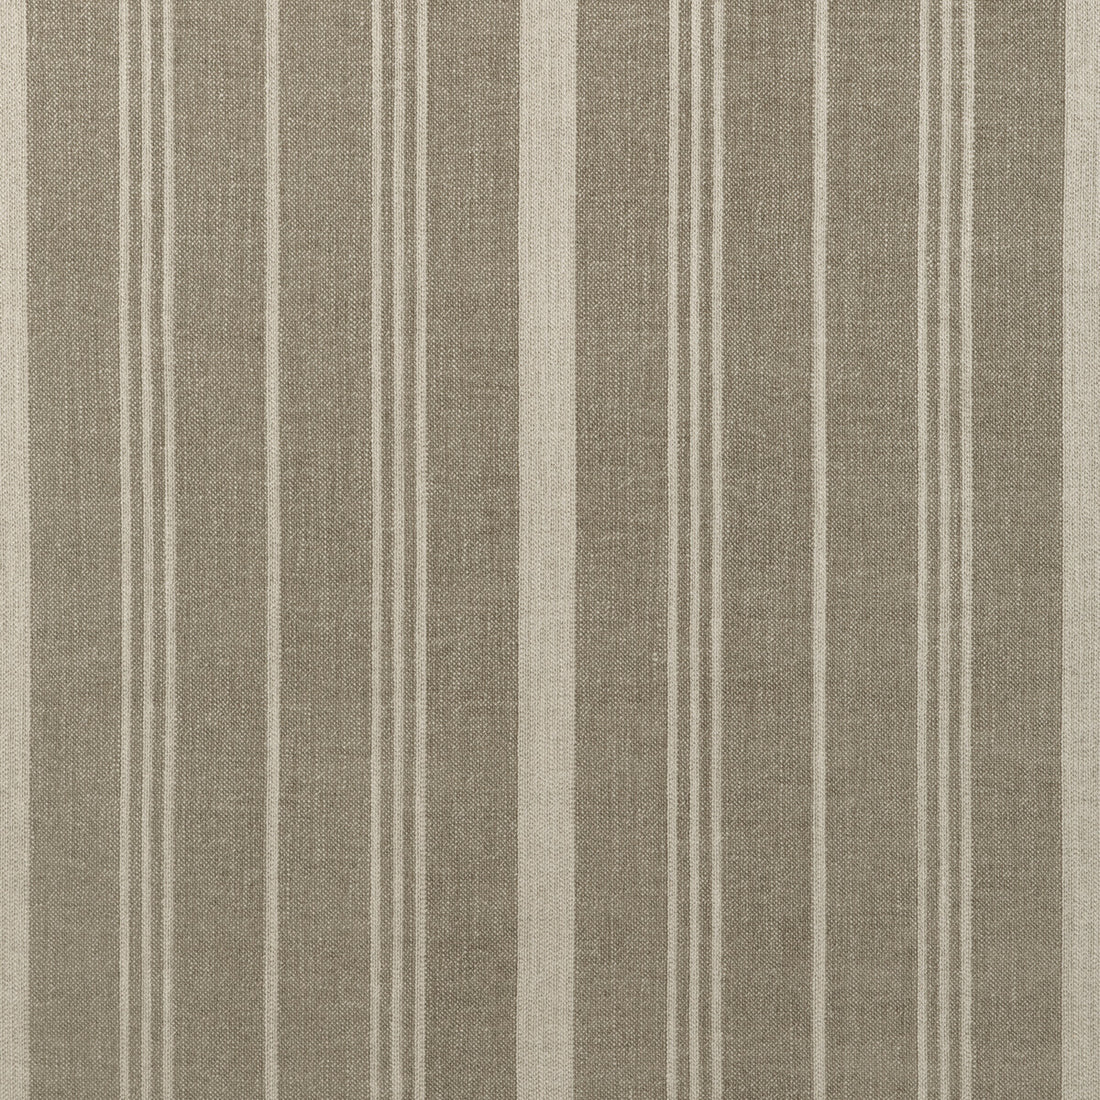 Furrow Stripe fabric in fawn color - pattern 36902.6.0 - by Kravet Couture in the Atelier Weaves collection